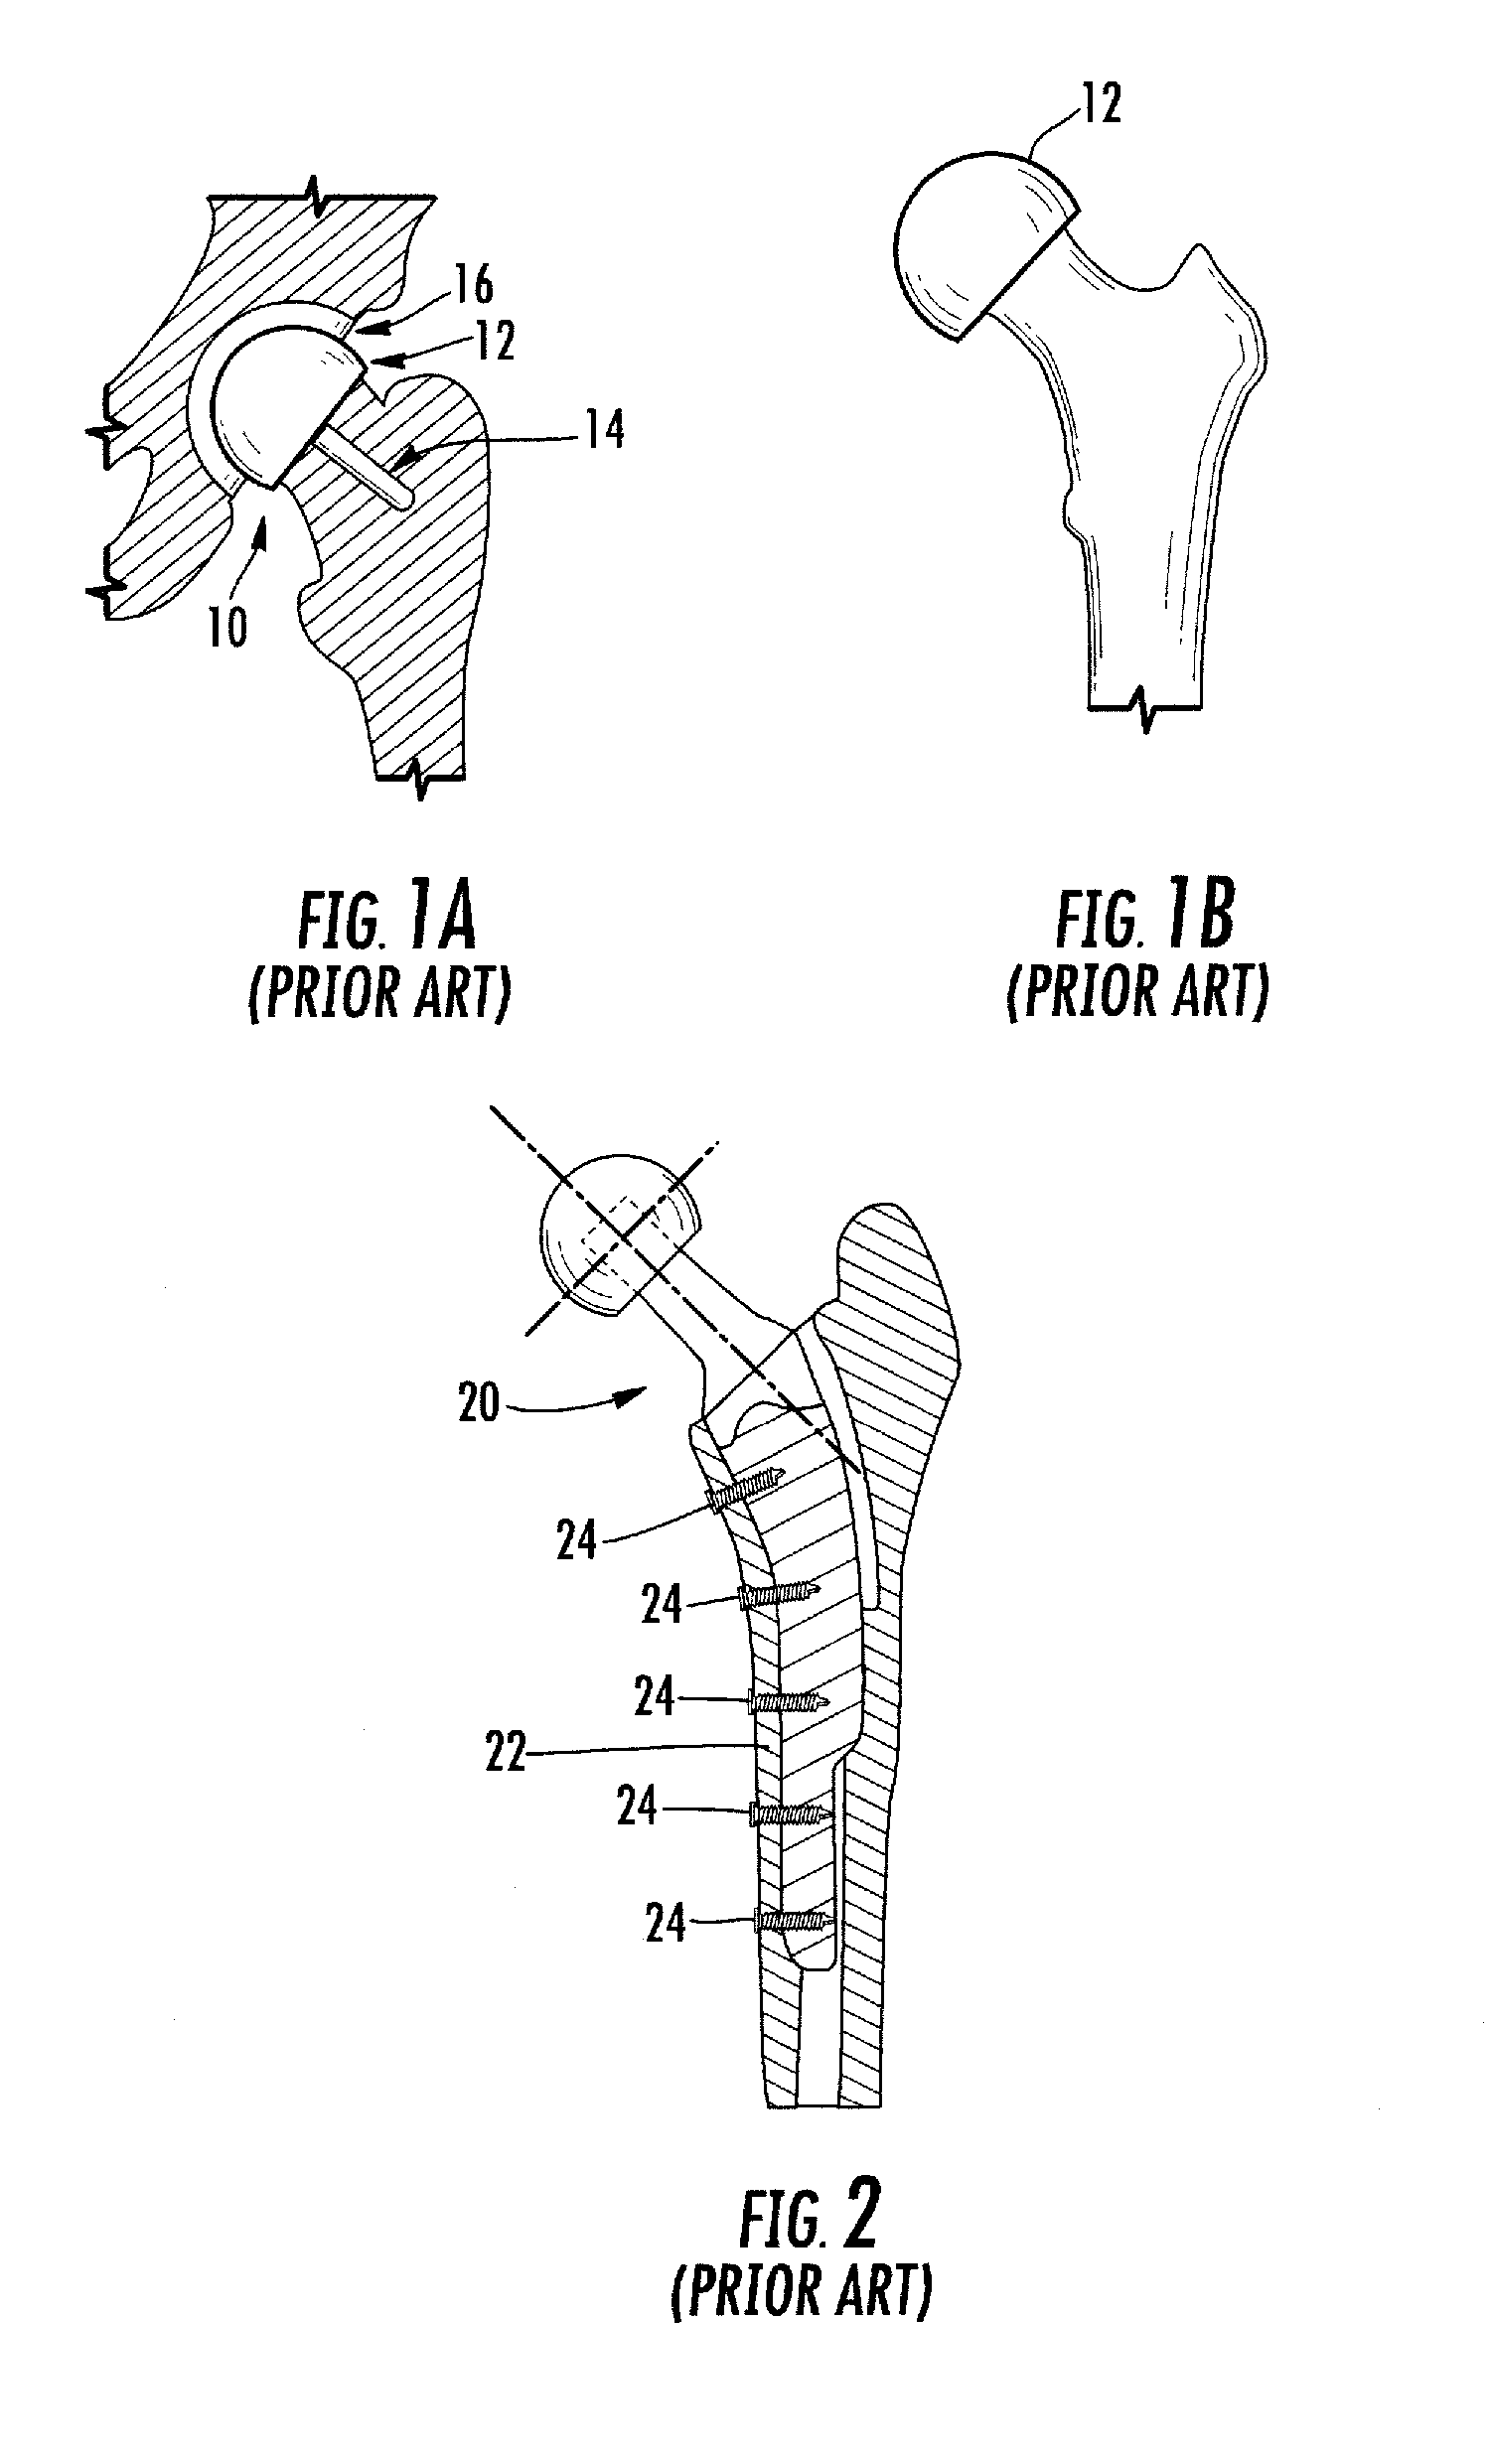 Femoral head resurfacing implant with internal plate fixation and instrumentation